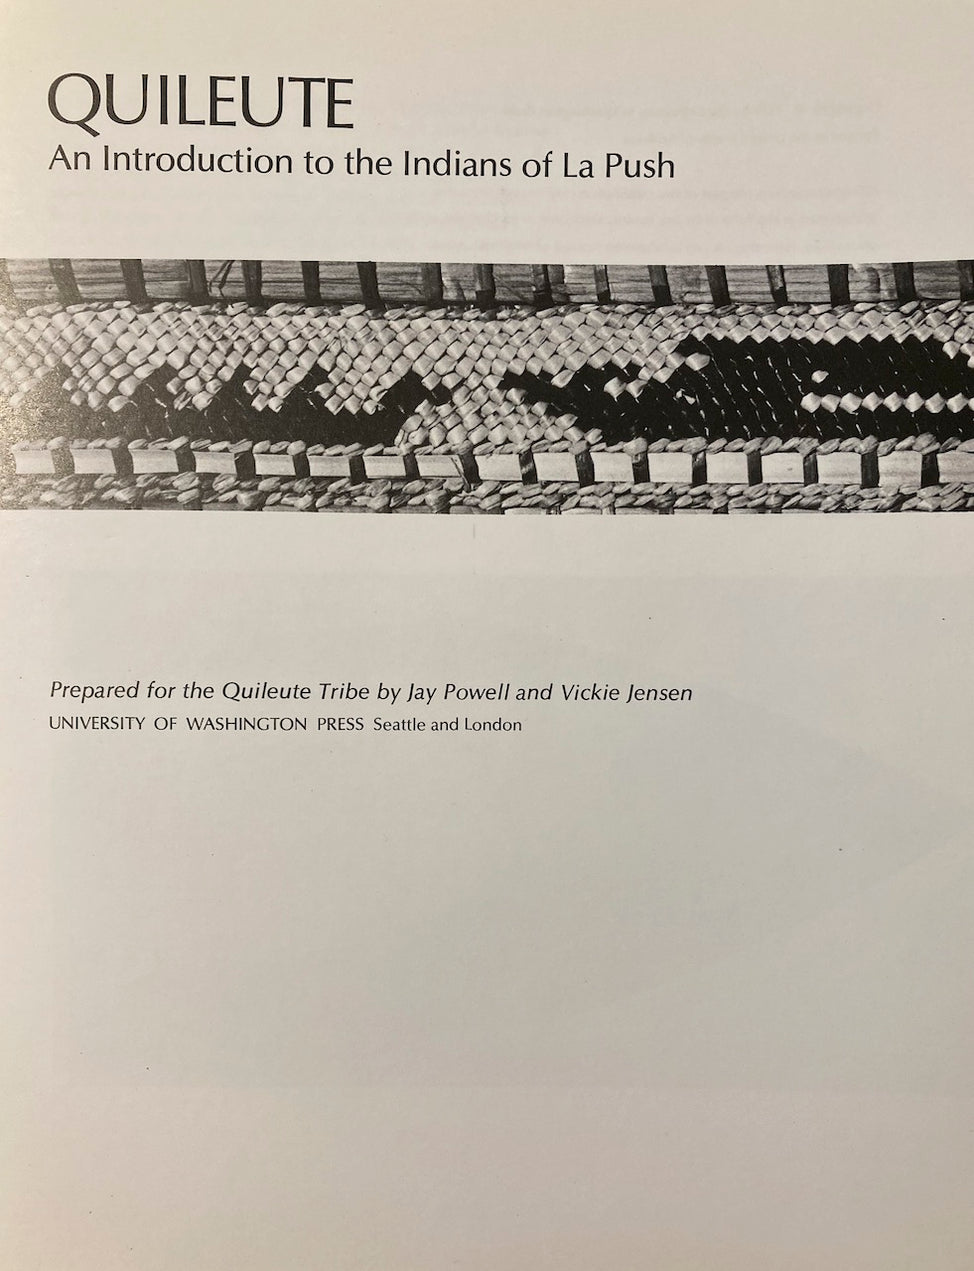 QUILEUTE: AN INTRODUCTION TO THE INDIANS OF LA PUSH 1976